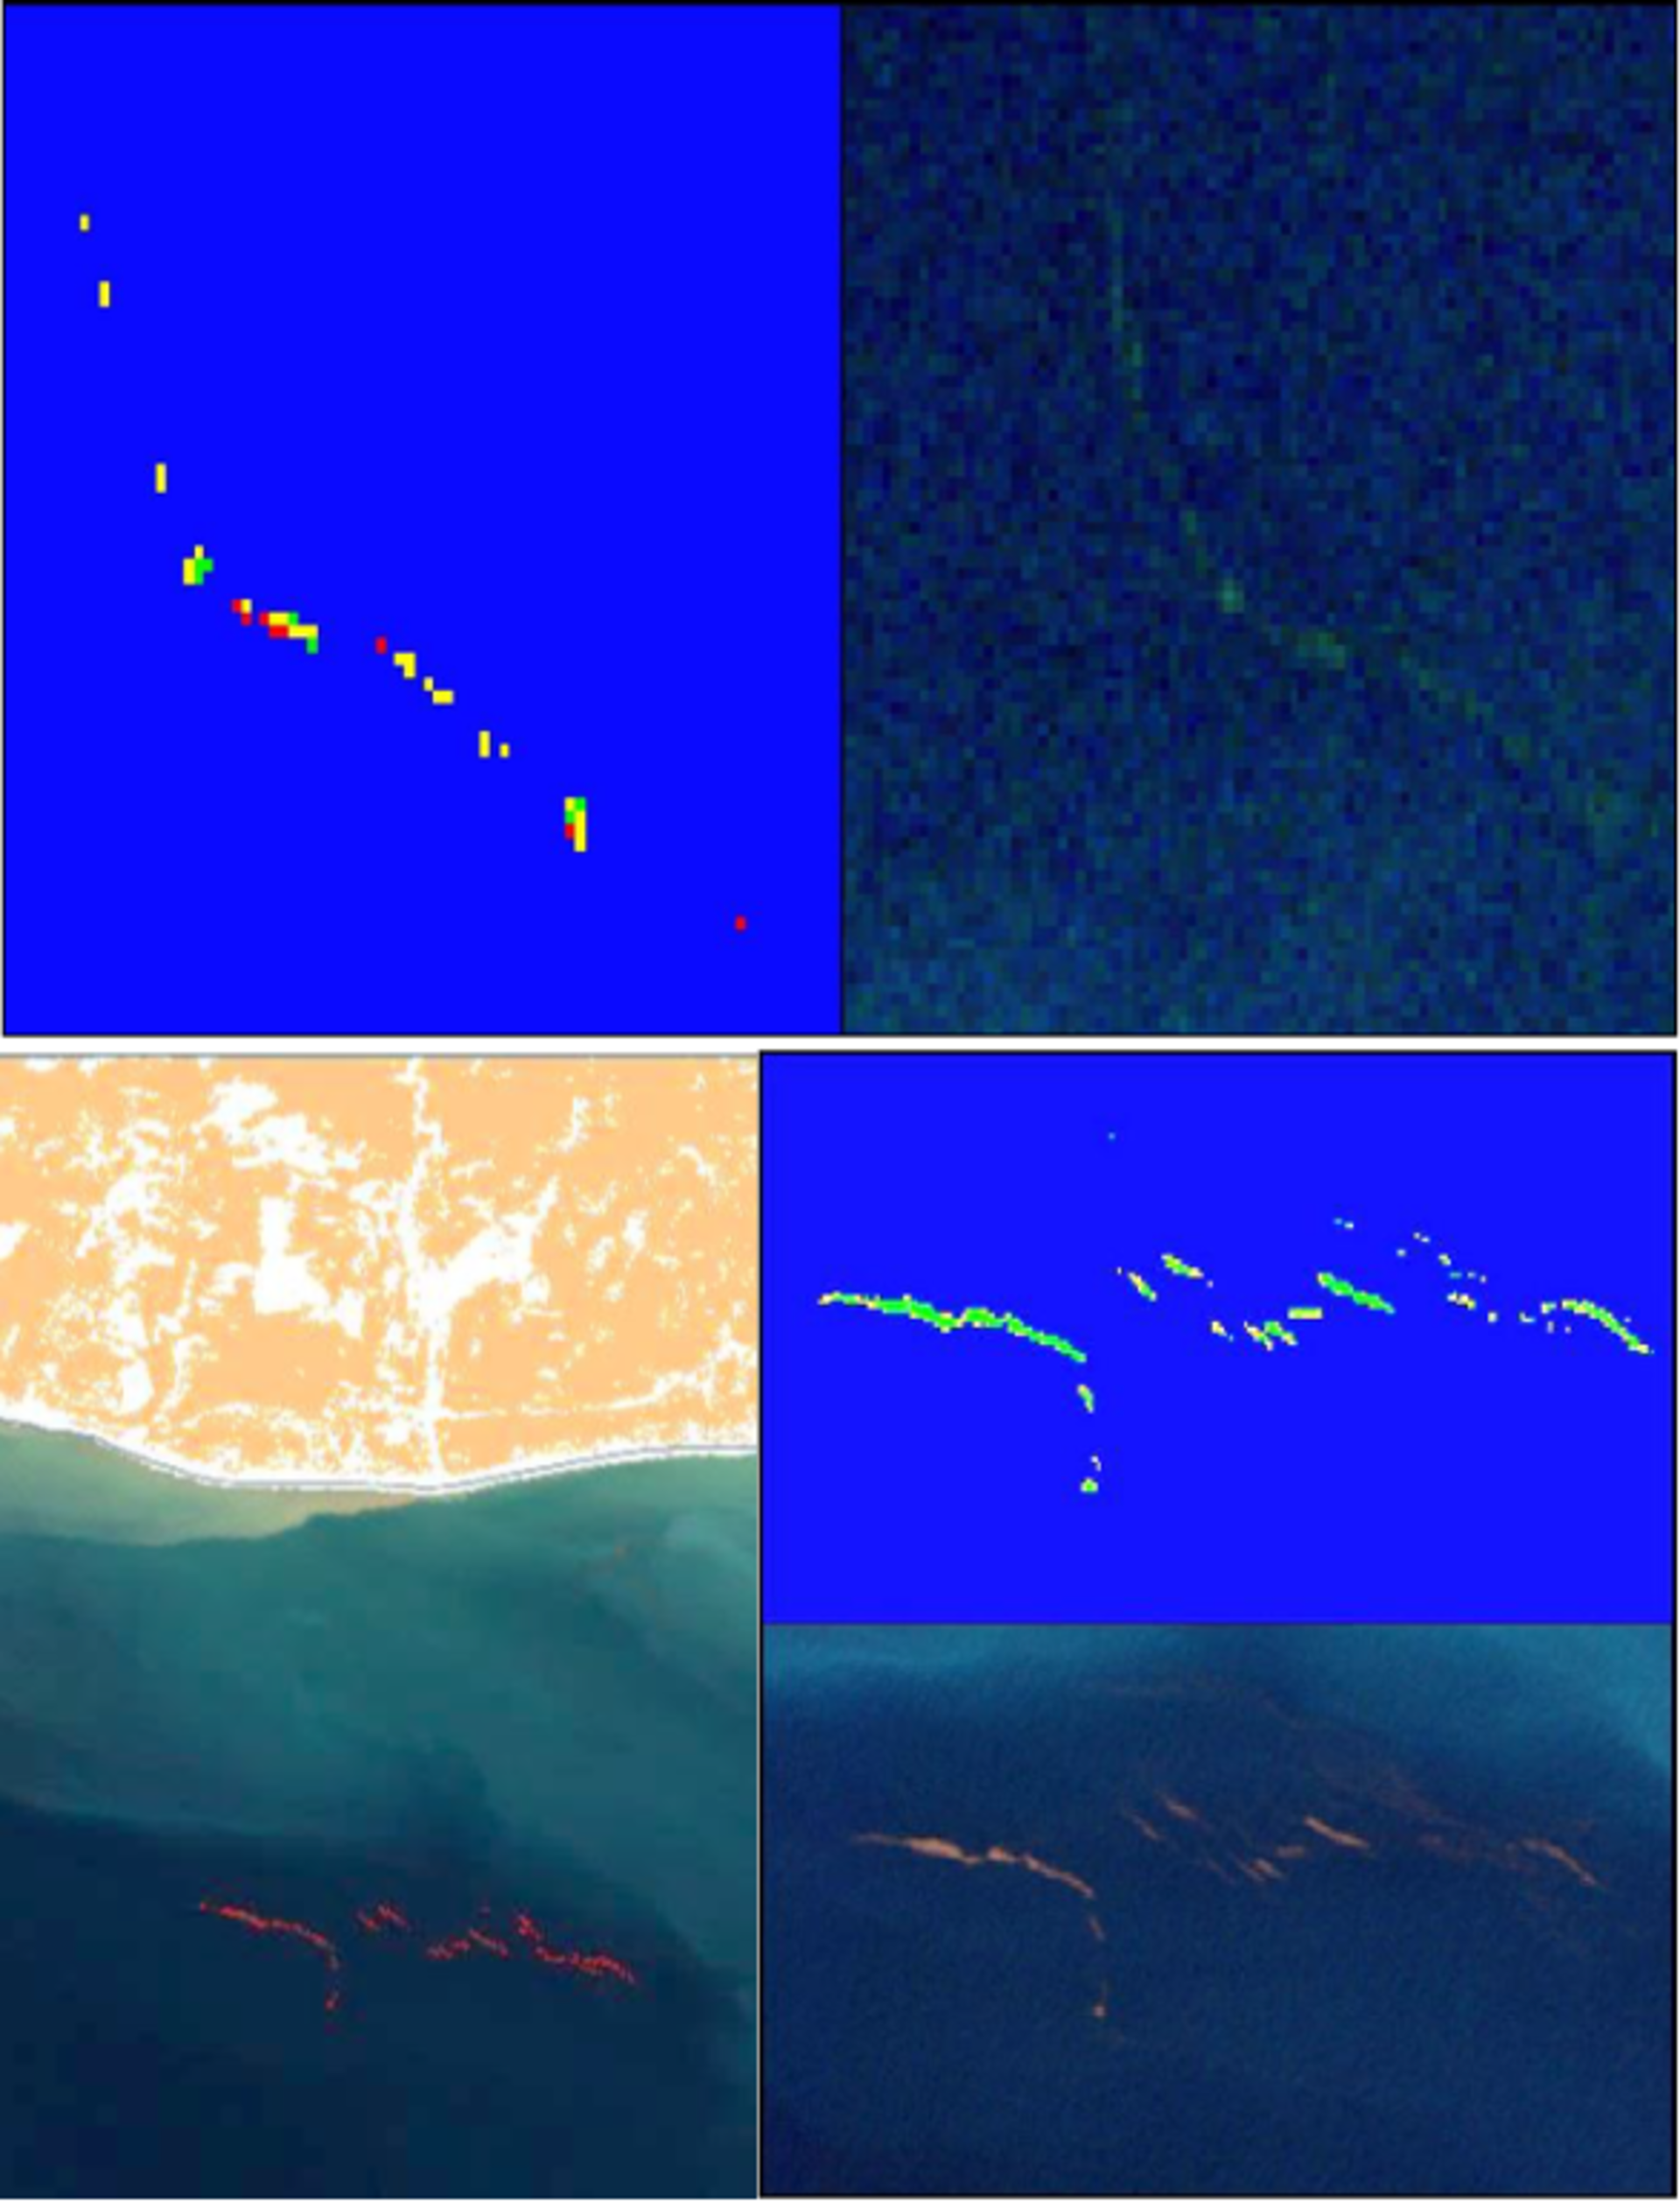 Accumulations of marine litter in the Mediterranean Sea, from satellite imagery processed in a previous ESA project related to marine litter